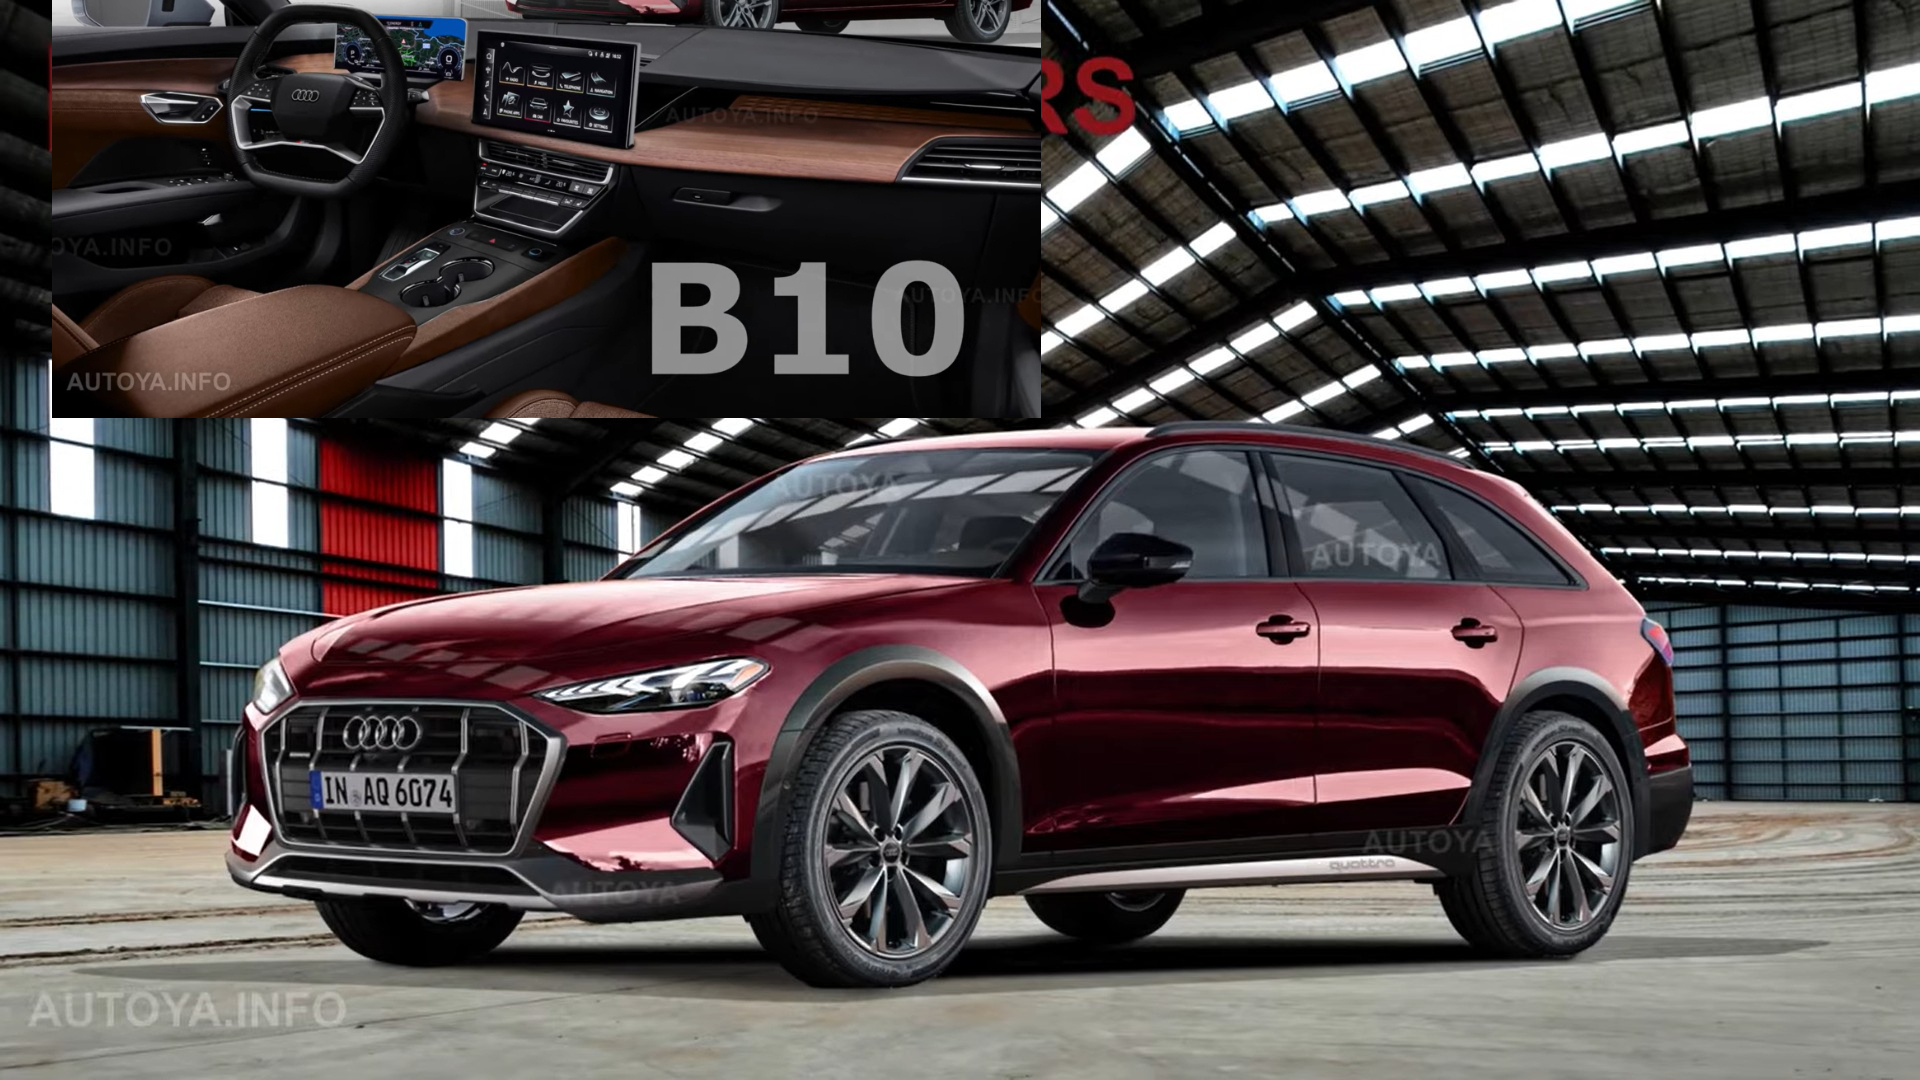 https://s1.cdn.autoevolution.com/images/news/all-new-2025-audi-a4-or-a5-allroad-b10-shows-everything-albeit-only-virtually-214454_1.jpg